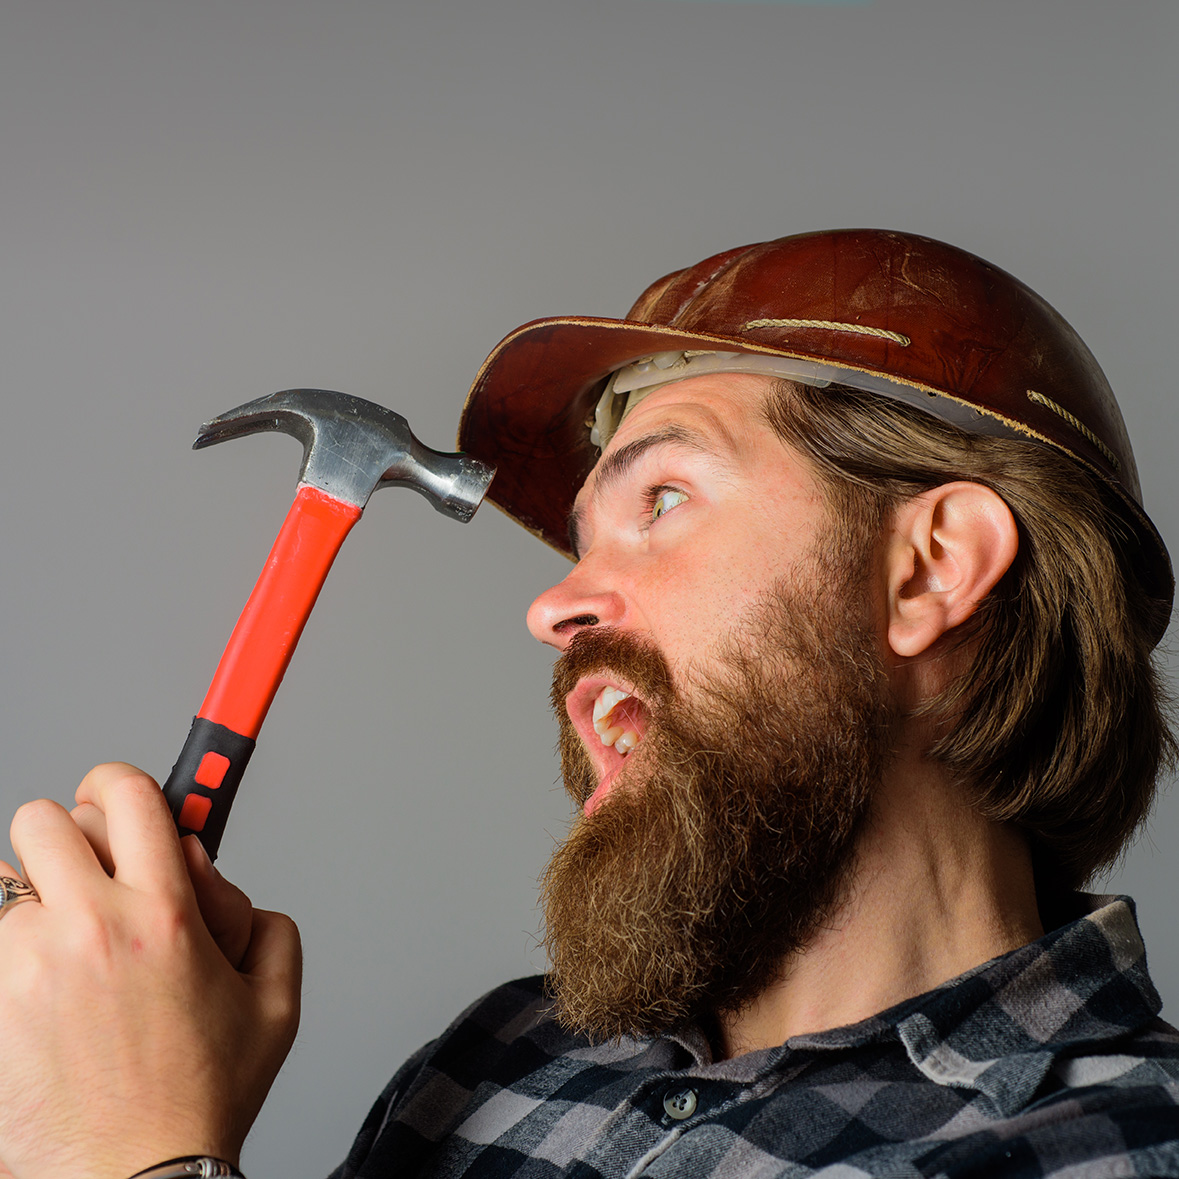 Repairment. Mechanical worker. Worker with hammer. Builder in hardhat. Portrait of bearded workman. Building, industry, technology. Builder in hard hat. Advertise